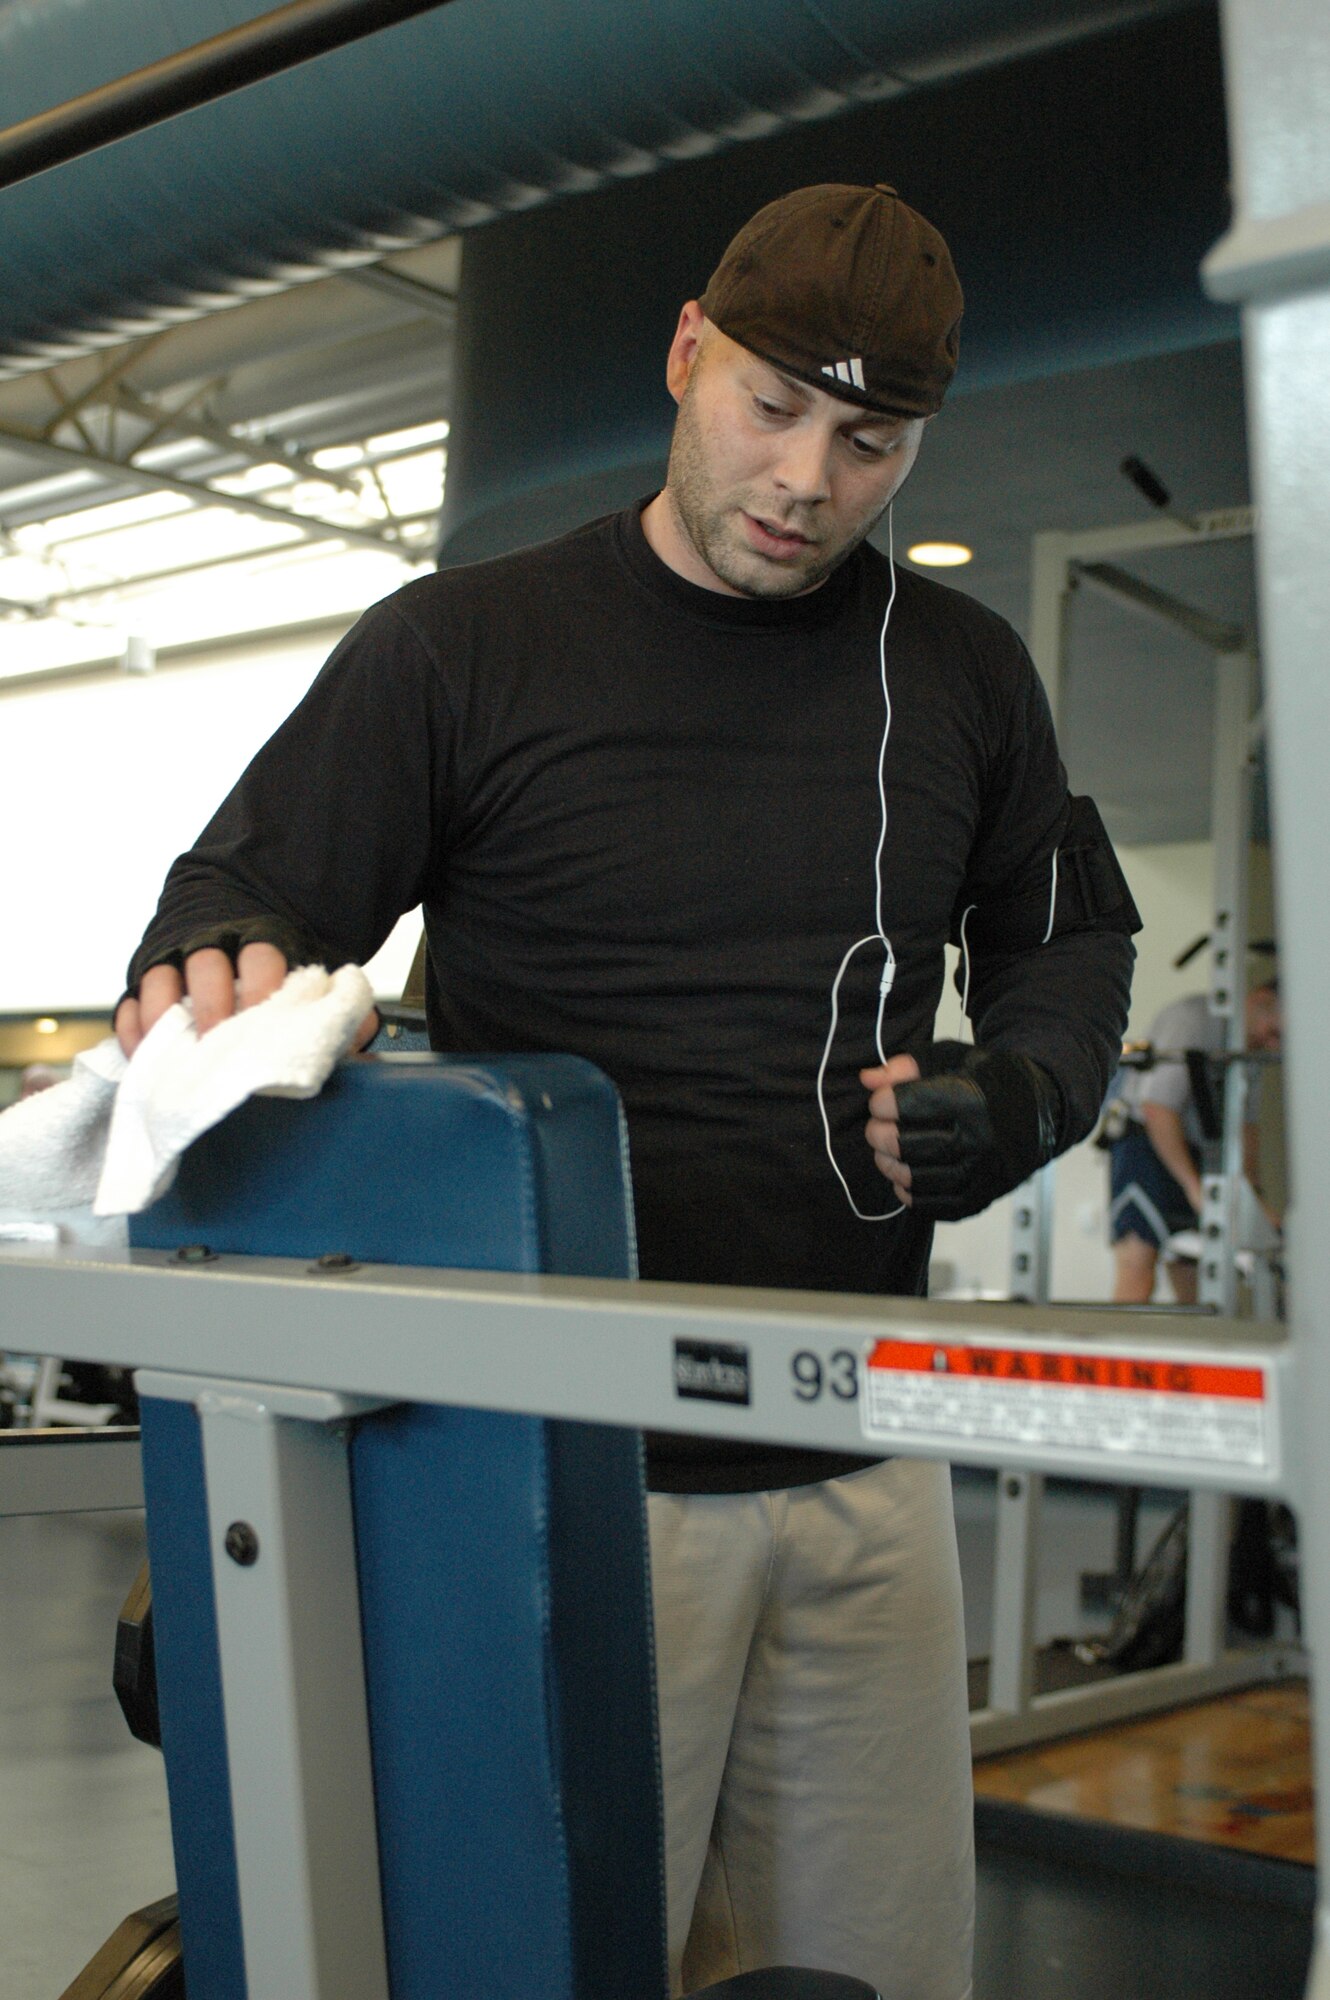 Staff Sgt. Jeffrey Mitchell, 60th Communications Squadron, wipes down a piece of equipment after using it.  Patrons of the Fitness Center are encouraged to wipe down all equipment they use during their workout. (U.S. Air Force photo by Staff Sgt. Raymond Hoy)